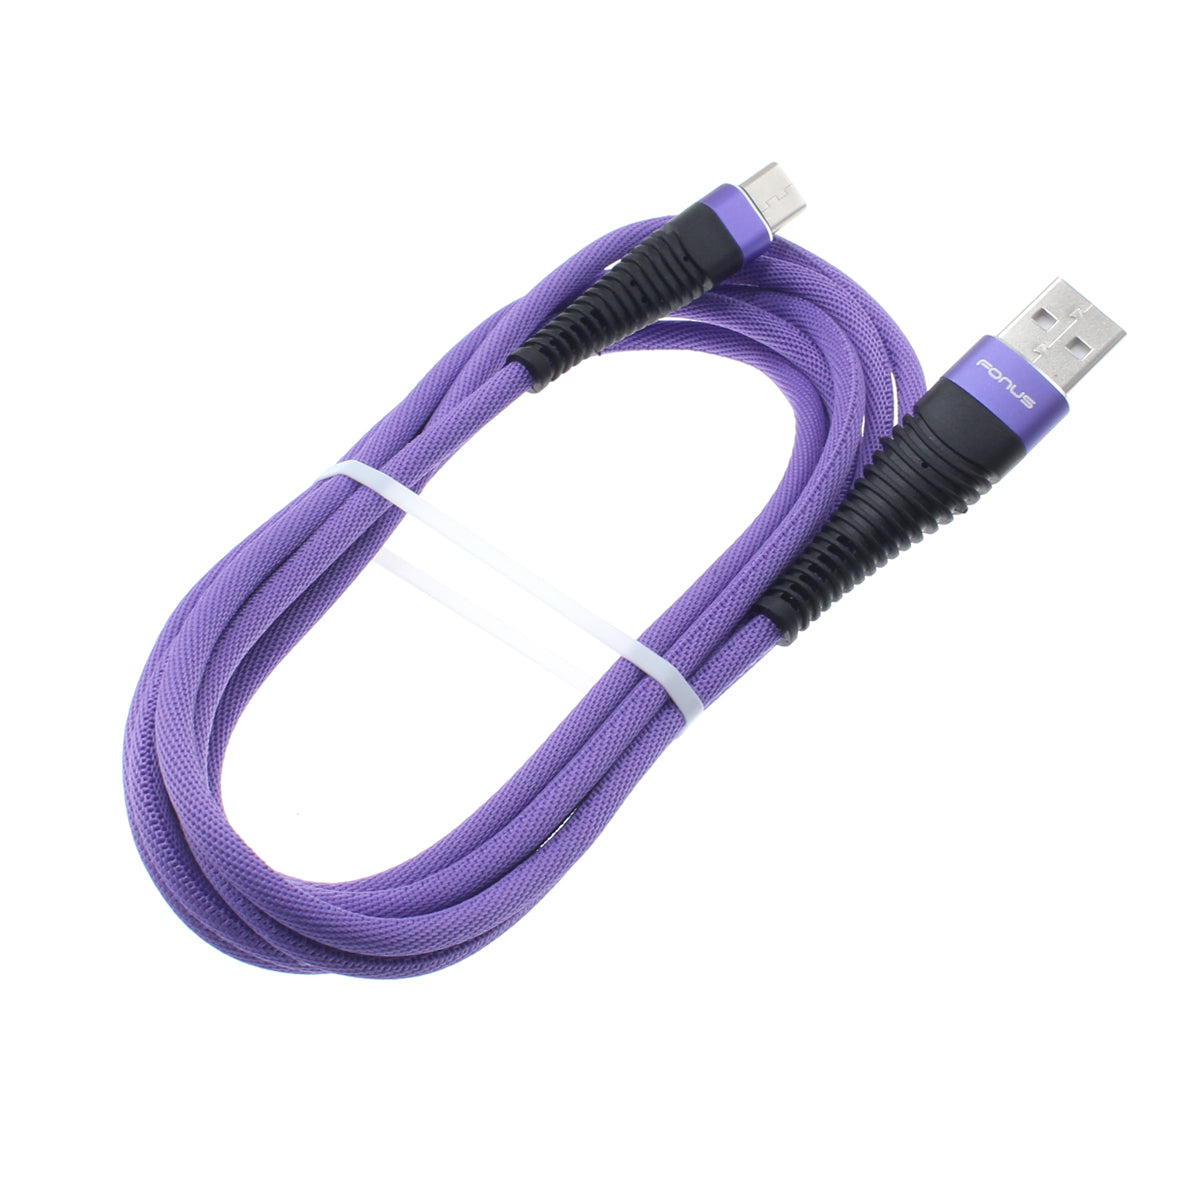 10ft USB Cable, Wire Power Charger Cord Type-C Purple - NWR92